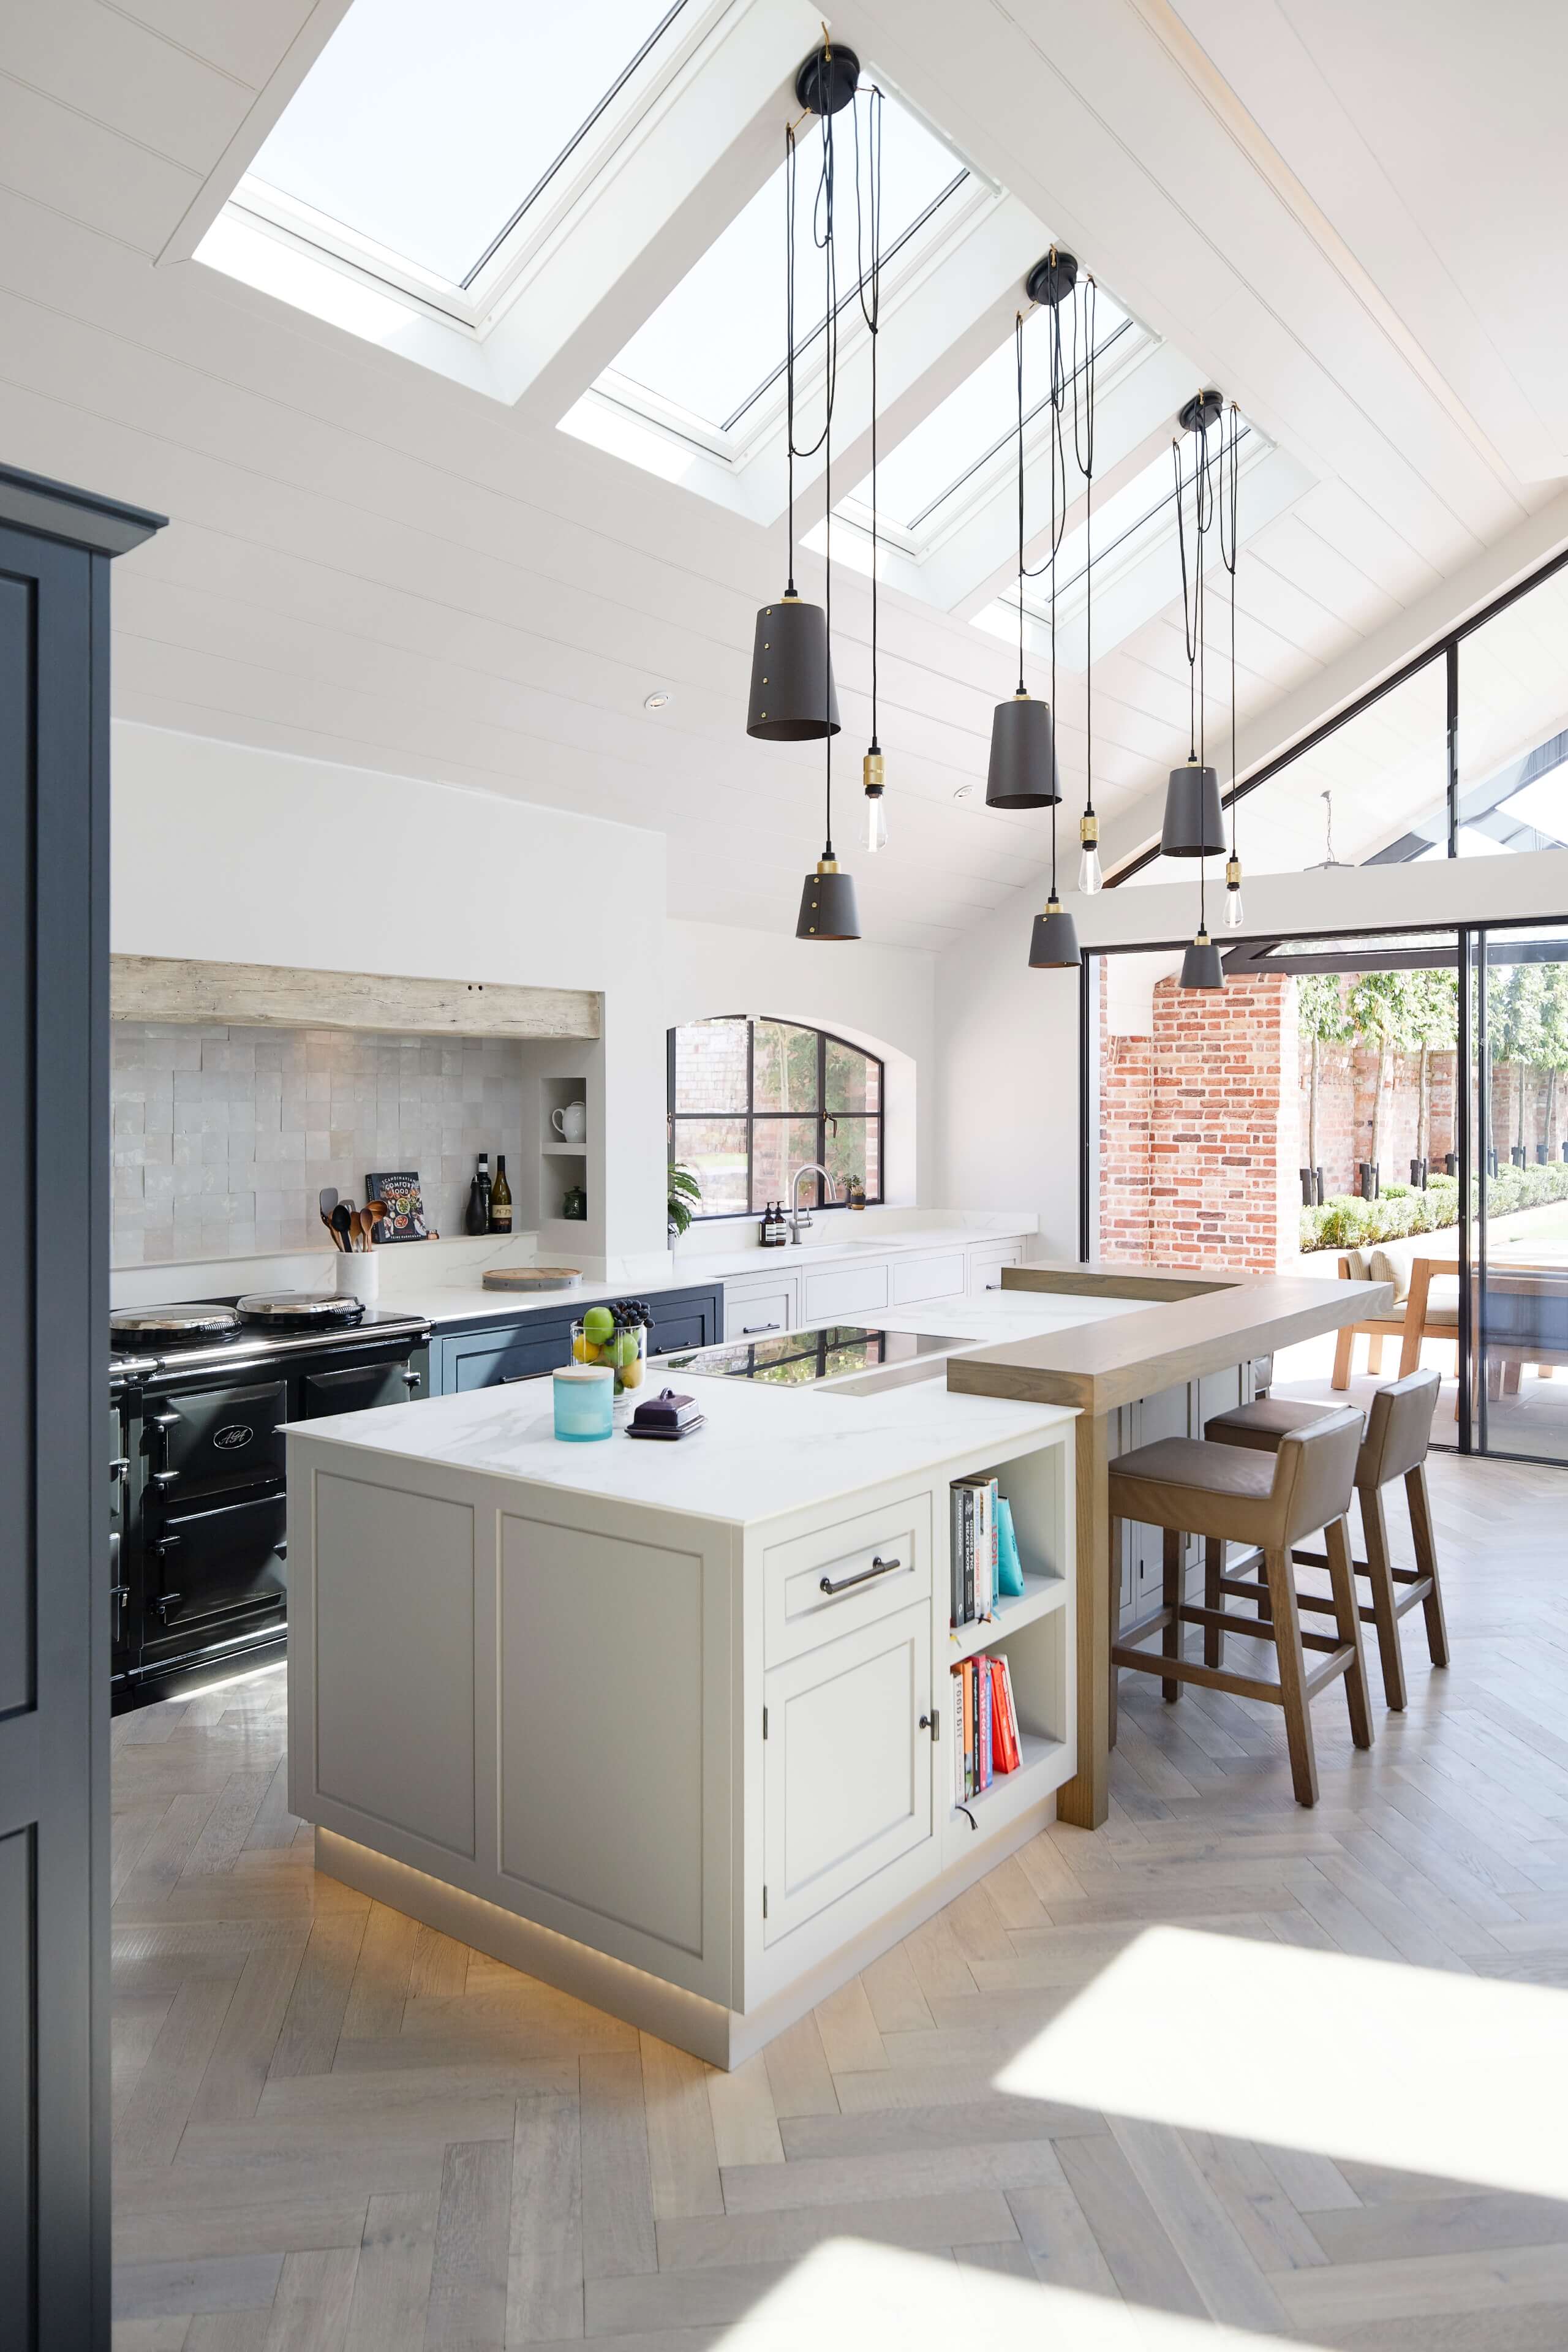 A bespoke kitchen by Hetherington Newman with a white painted base cabinets and white AGA cooker